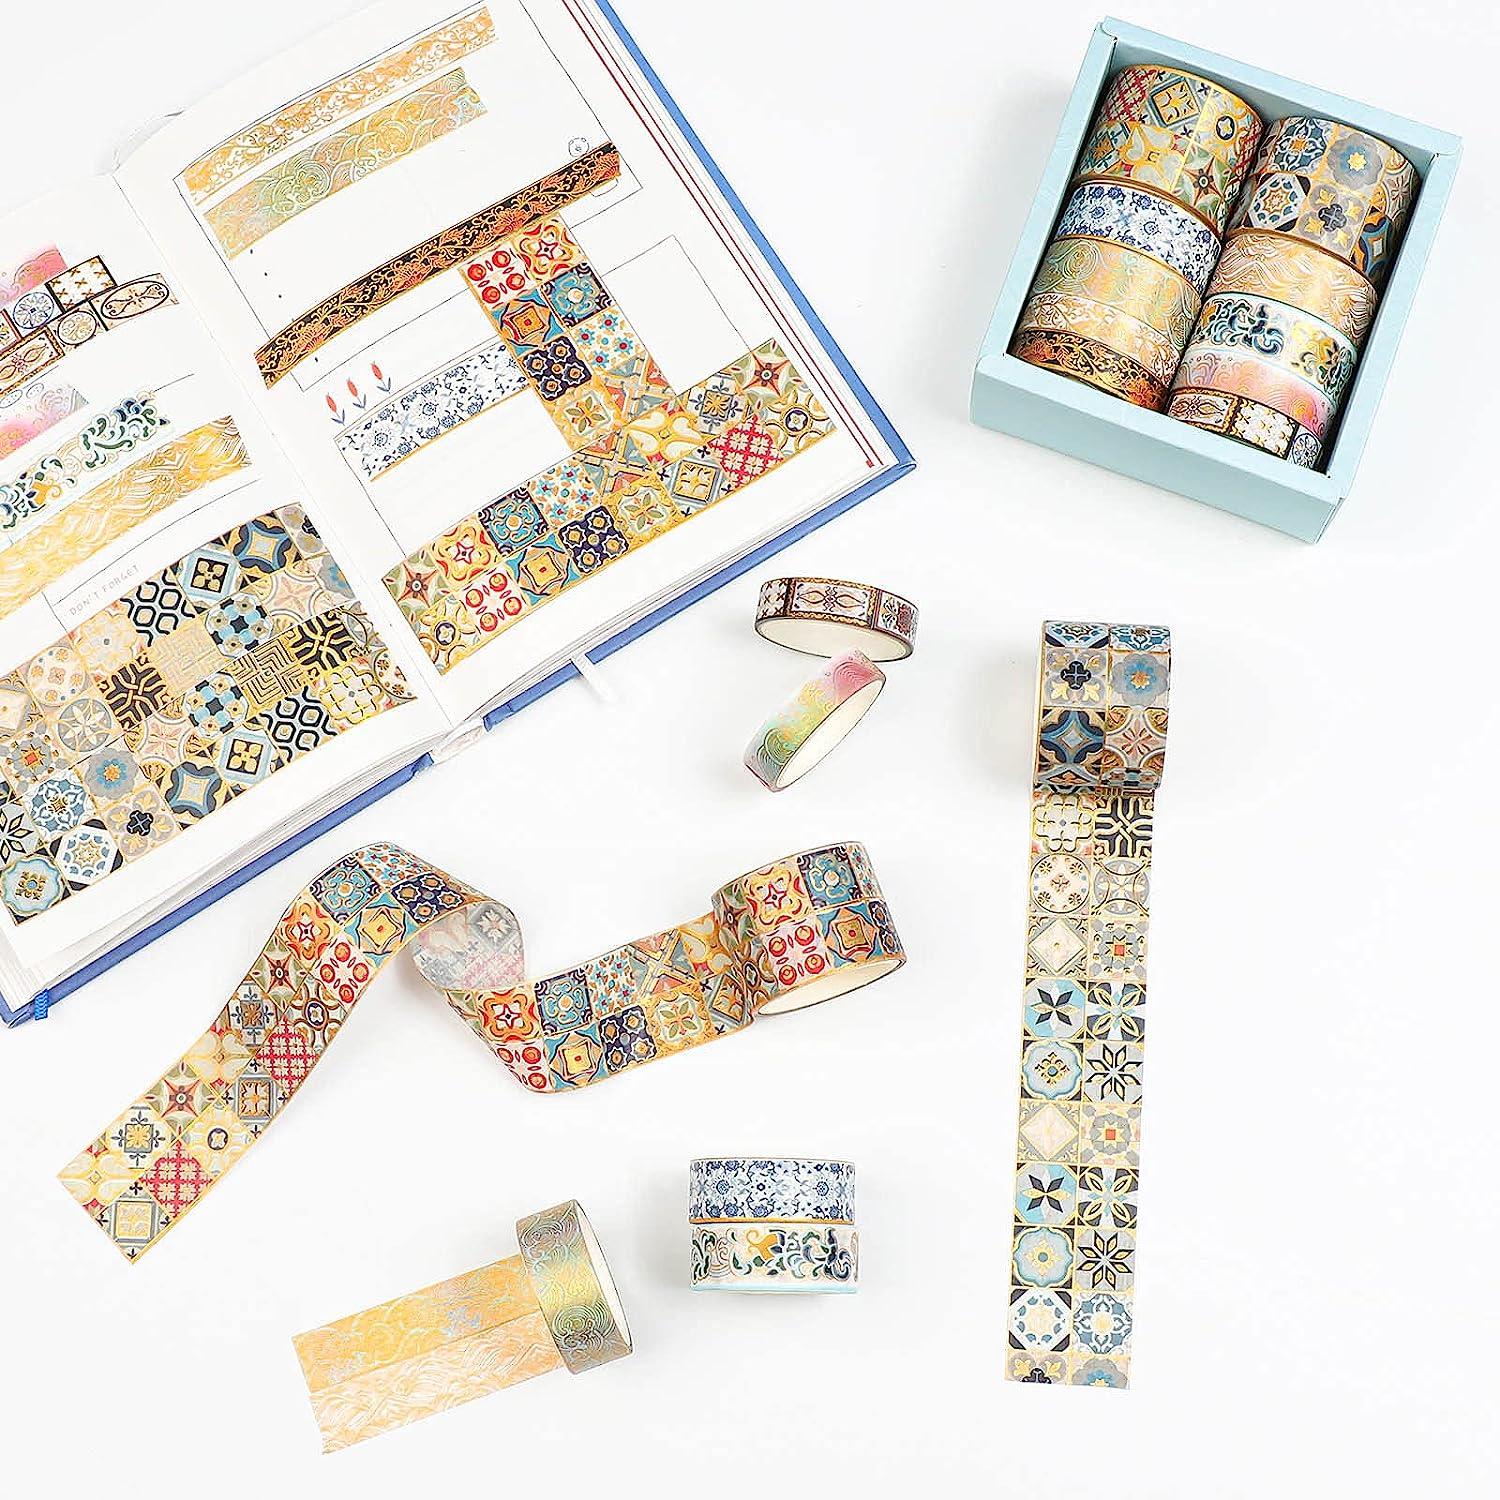 AEBORN Gold Vintage Washi Tape - Foil Washi Masking Tape Set with Gift Box  - Aesthetic Decorative Tape Perfect for Bullet Journal, Scrapbook, DIY  Crafts AGorgeous art